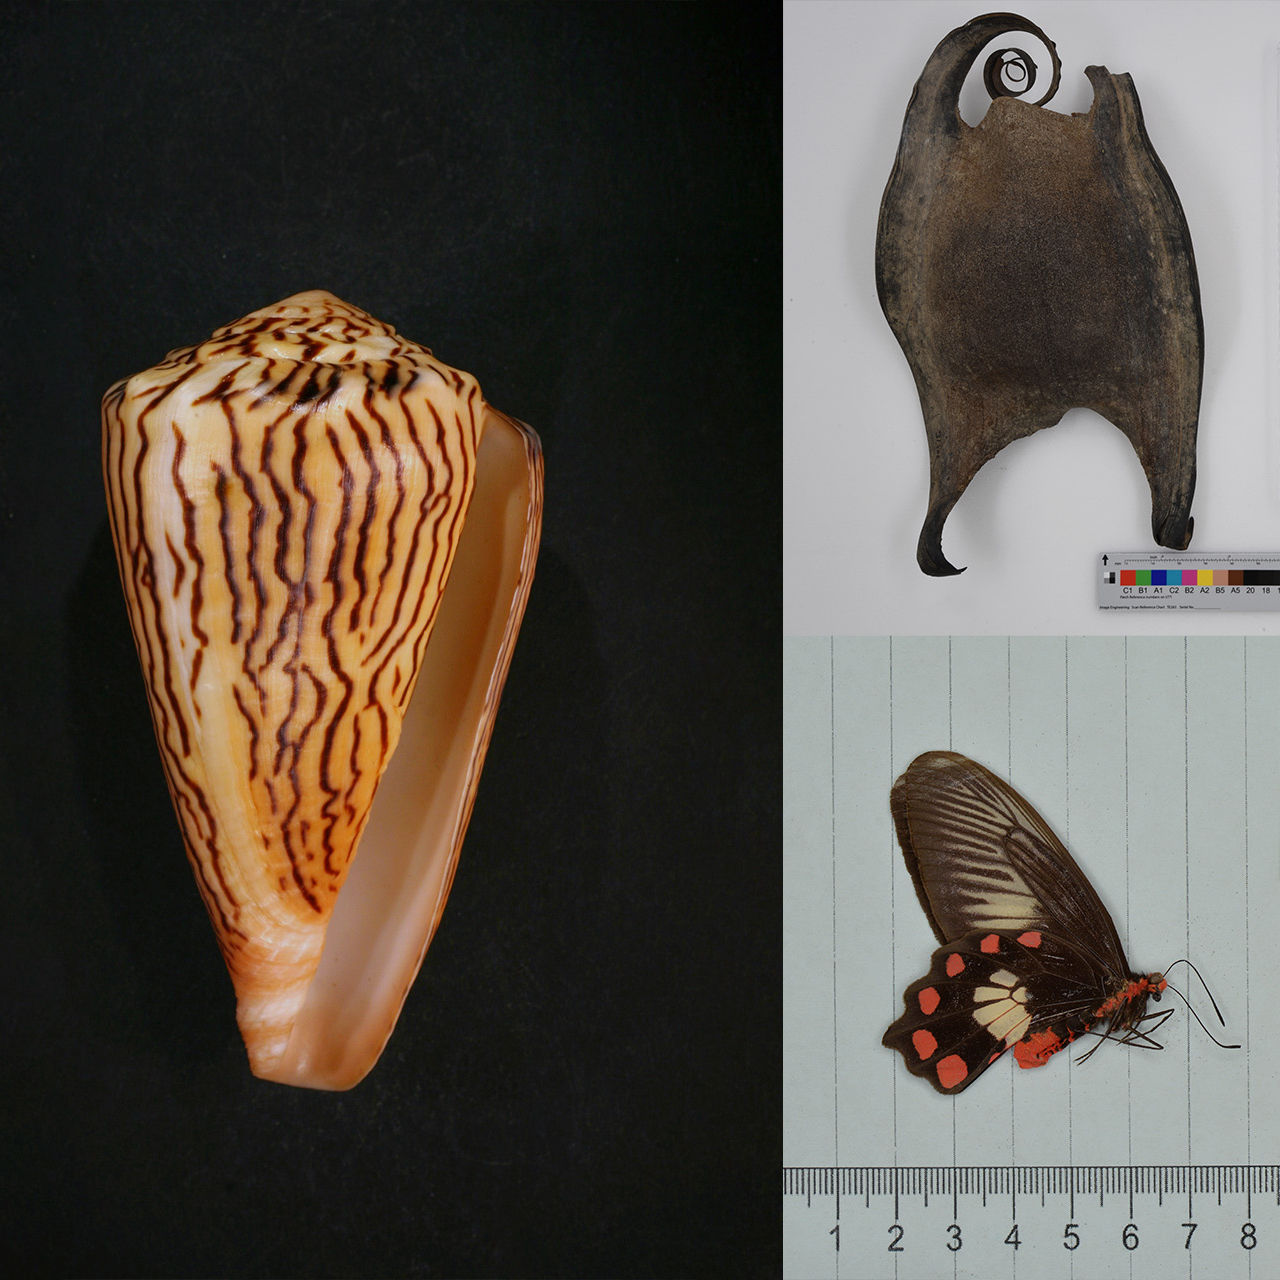 Naturalis AI images recognition of collection items